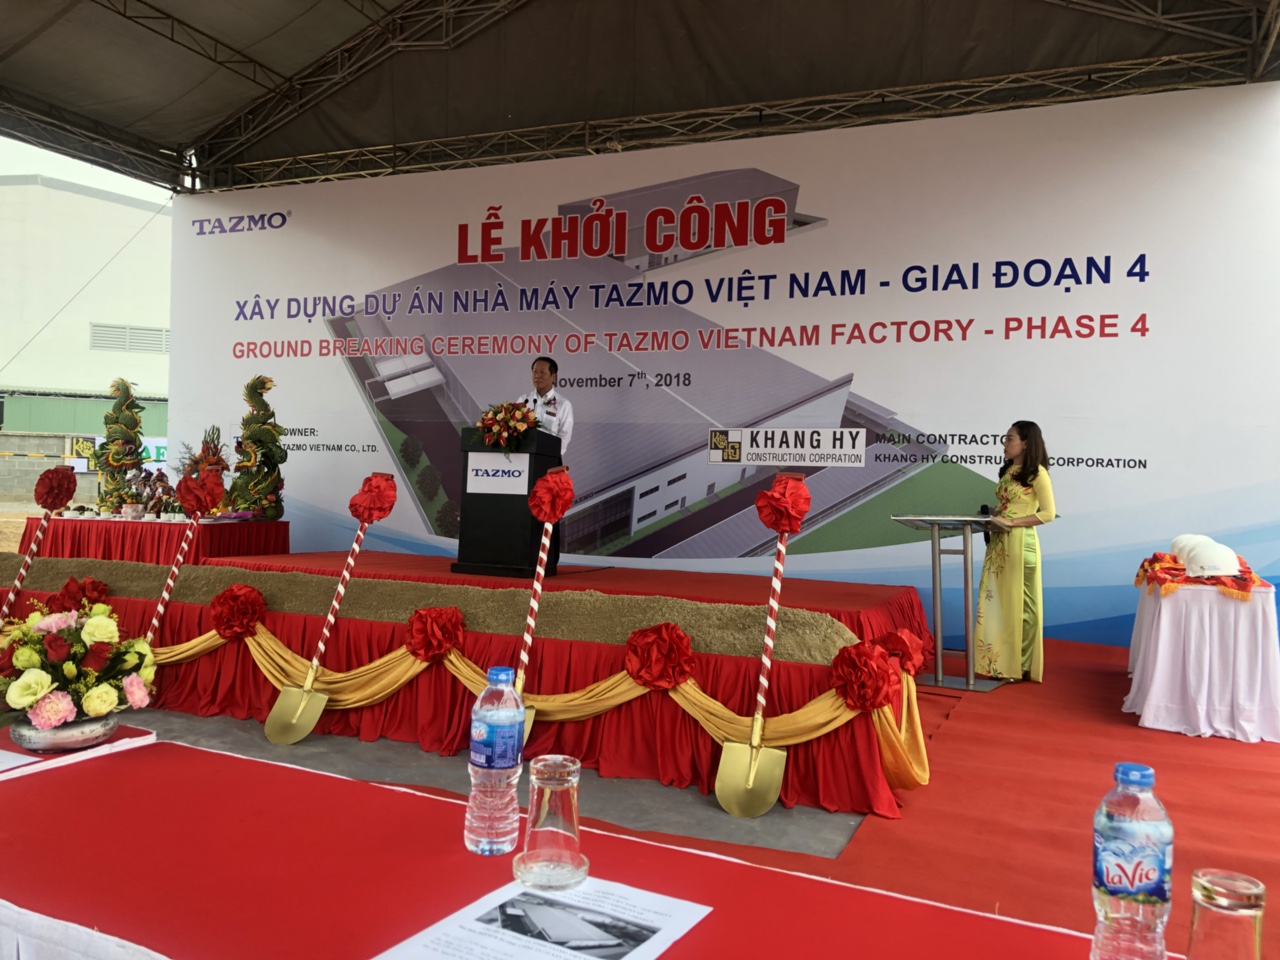 TAZMO VIET NAM FACTORY - PHASE 4